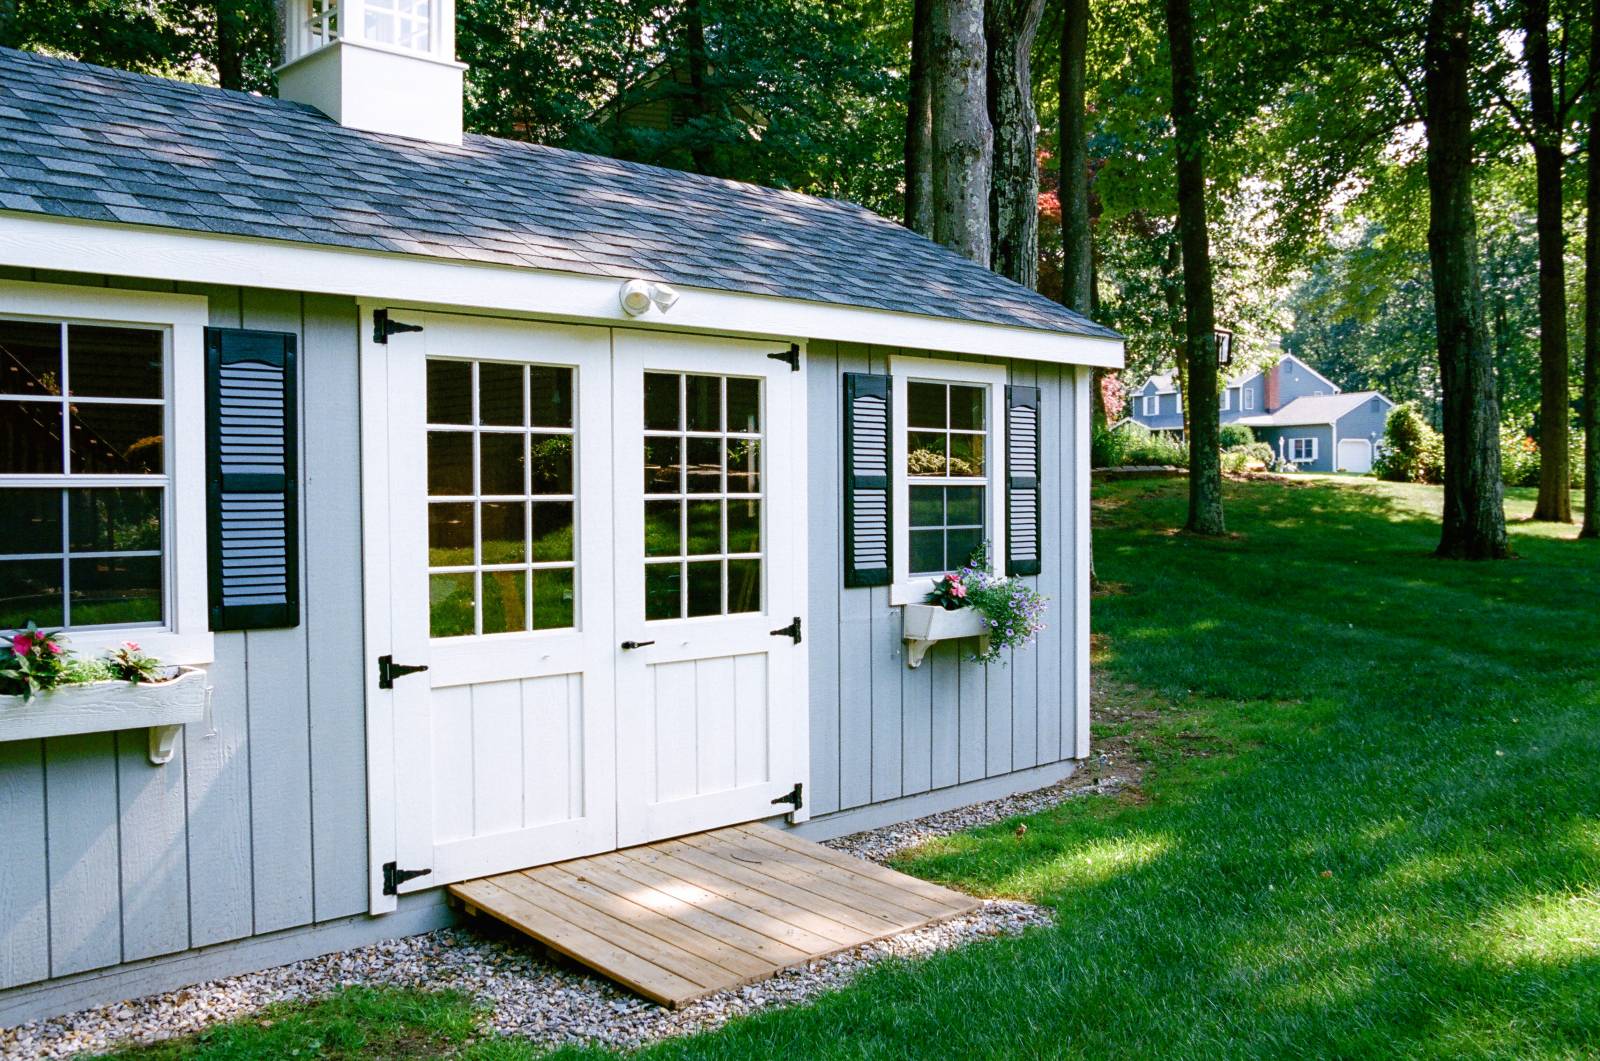 An exceptionally built shed